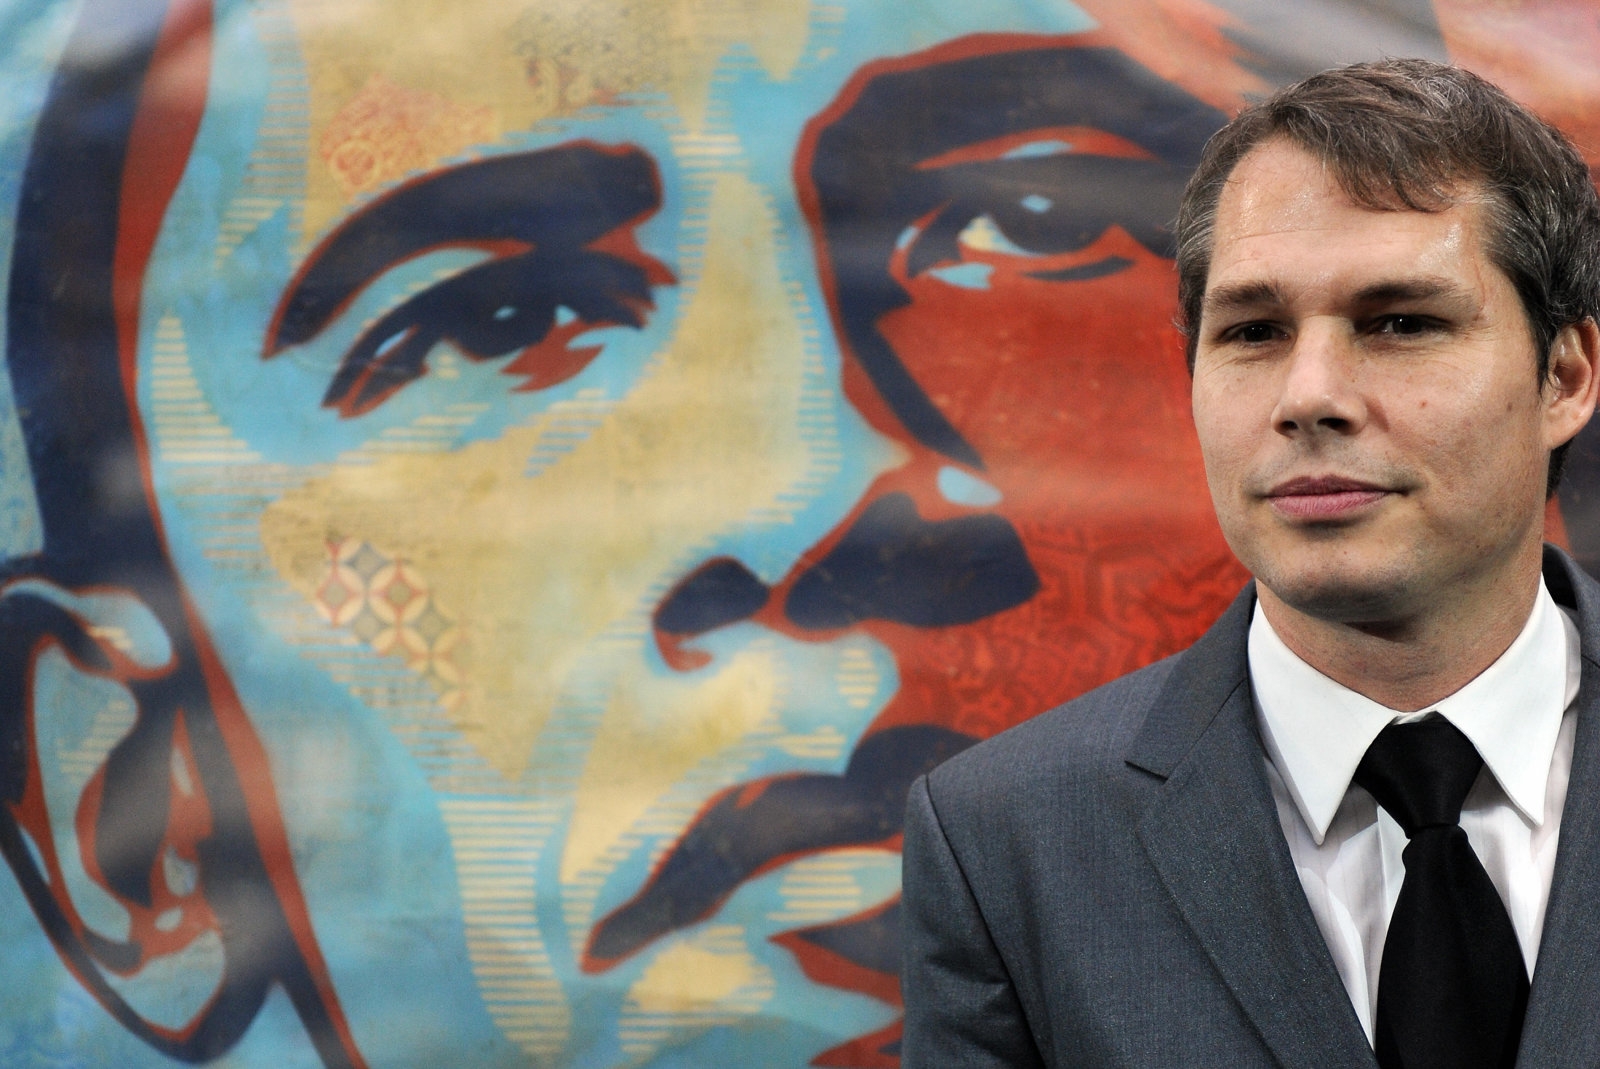 Shepard Fairey documentary ‘Obey Giant’ hits Hulu this weekend | DeviceDaily.com